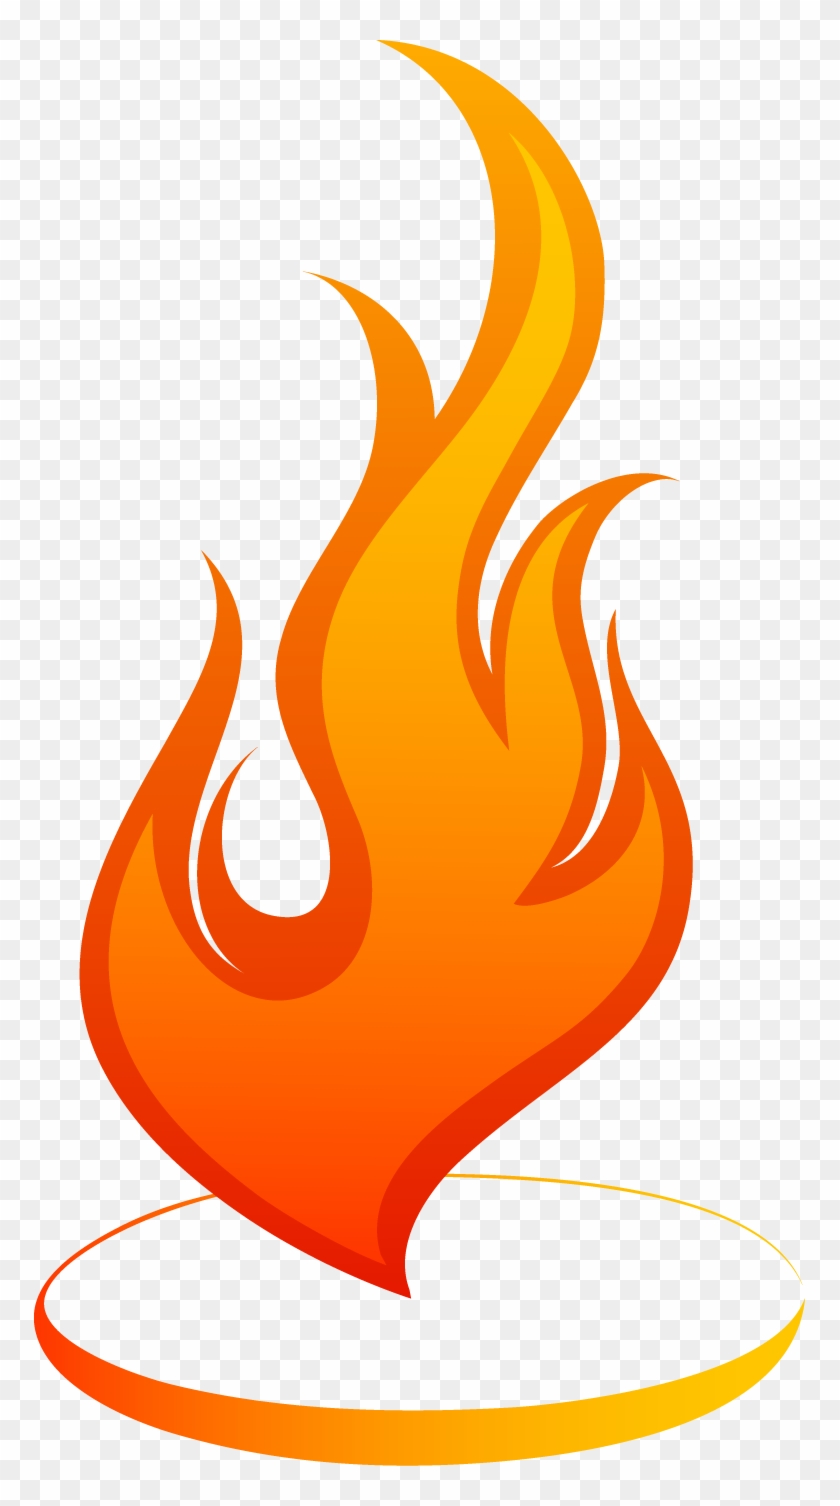 Flame, Fire 01 Png - Fire Flame Clip Art Transparent Png